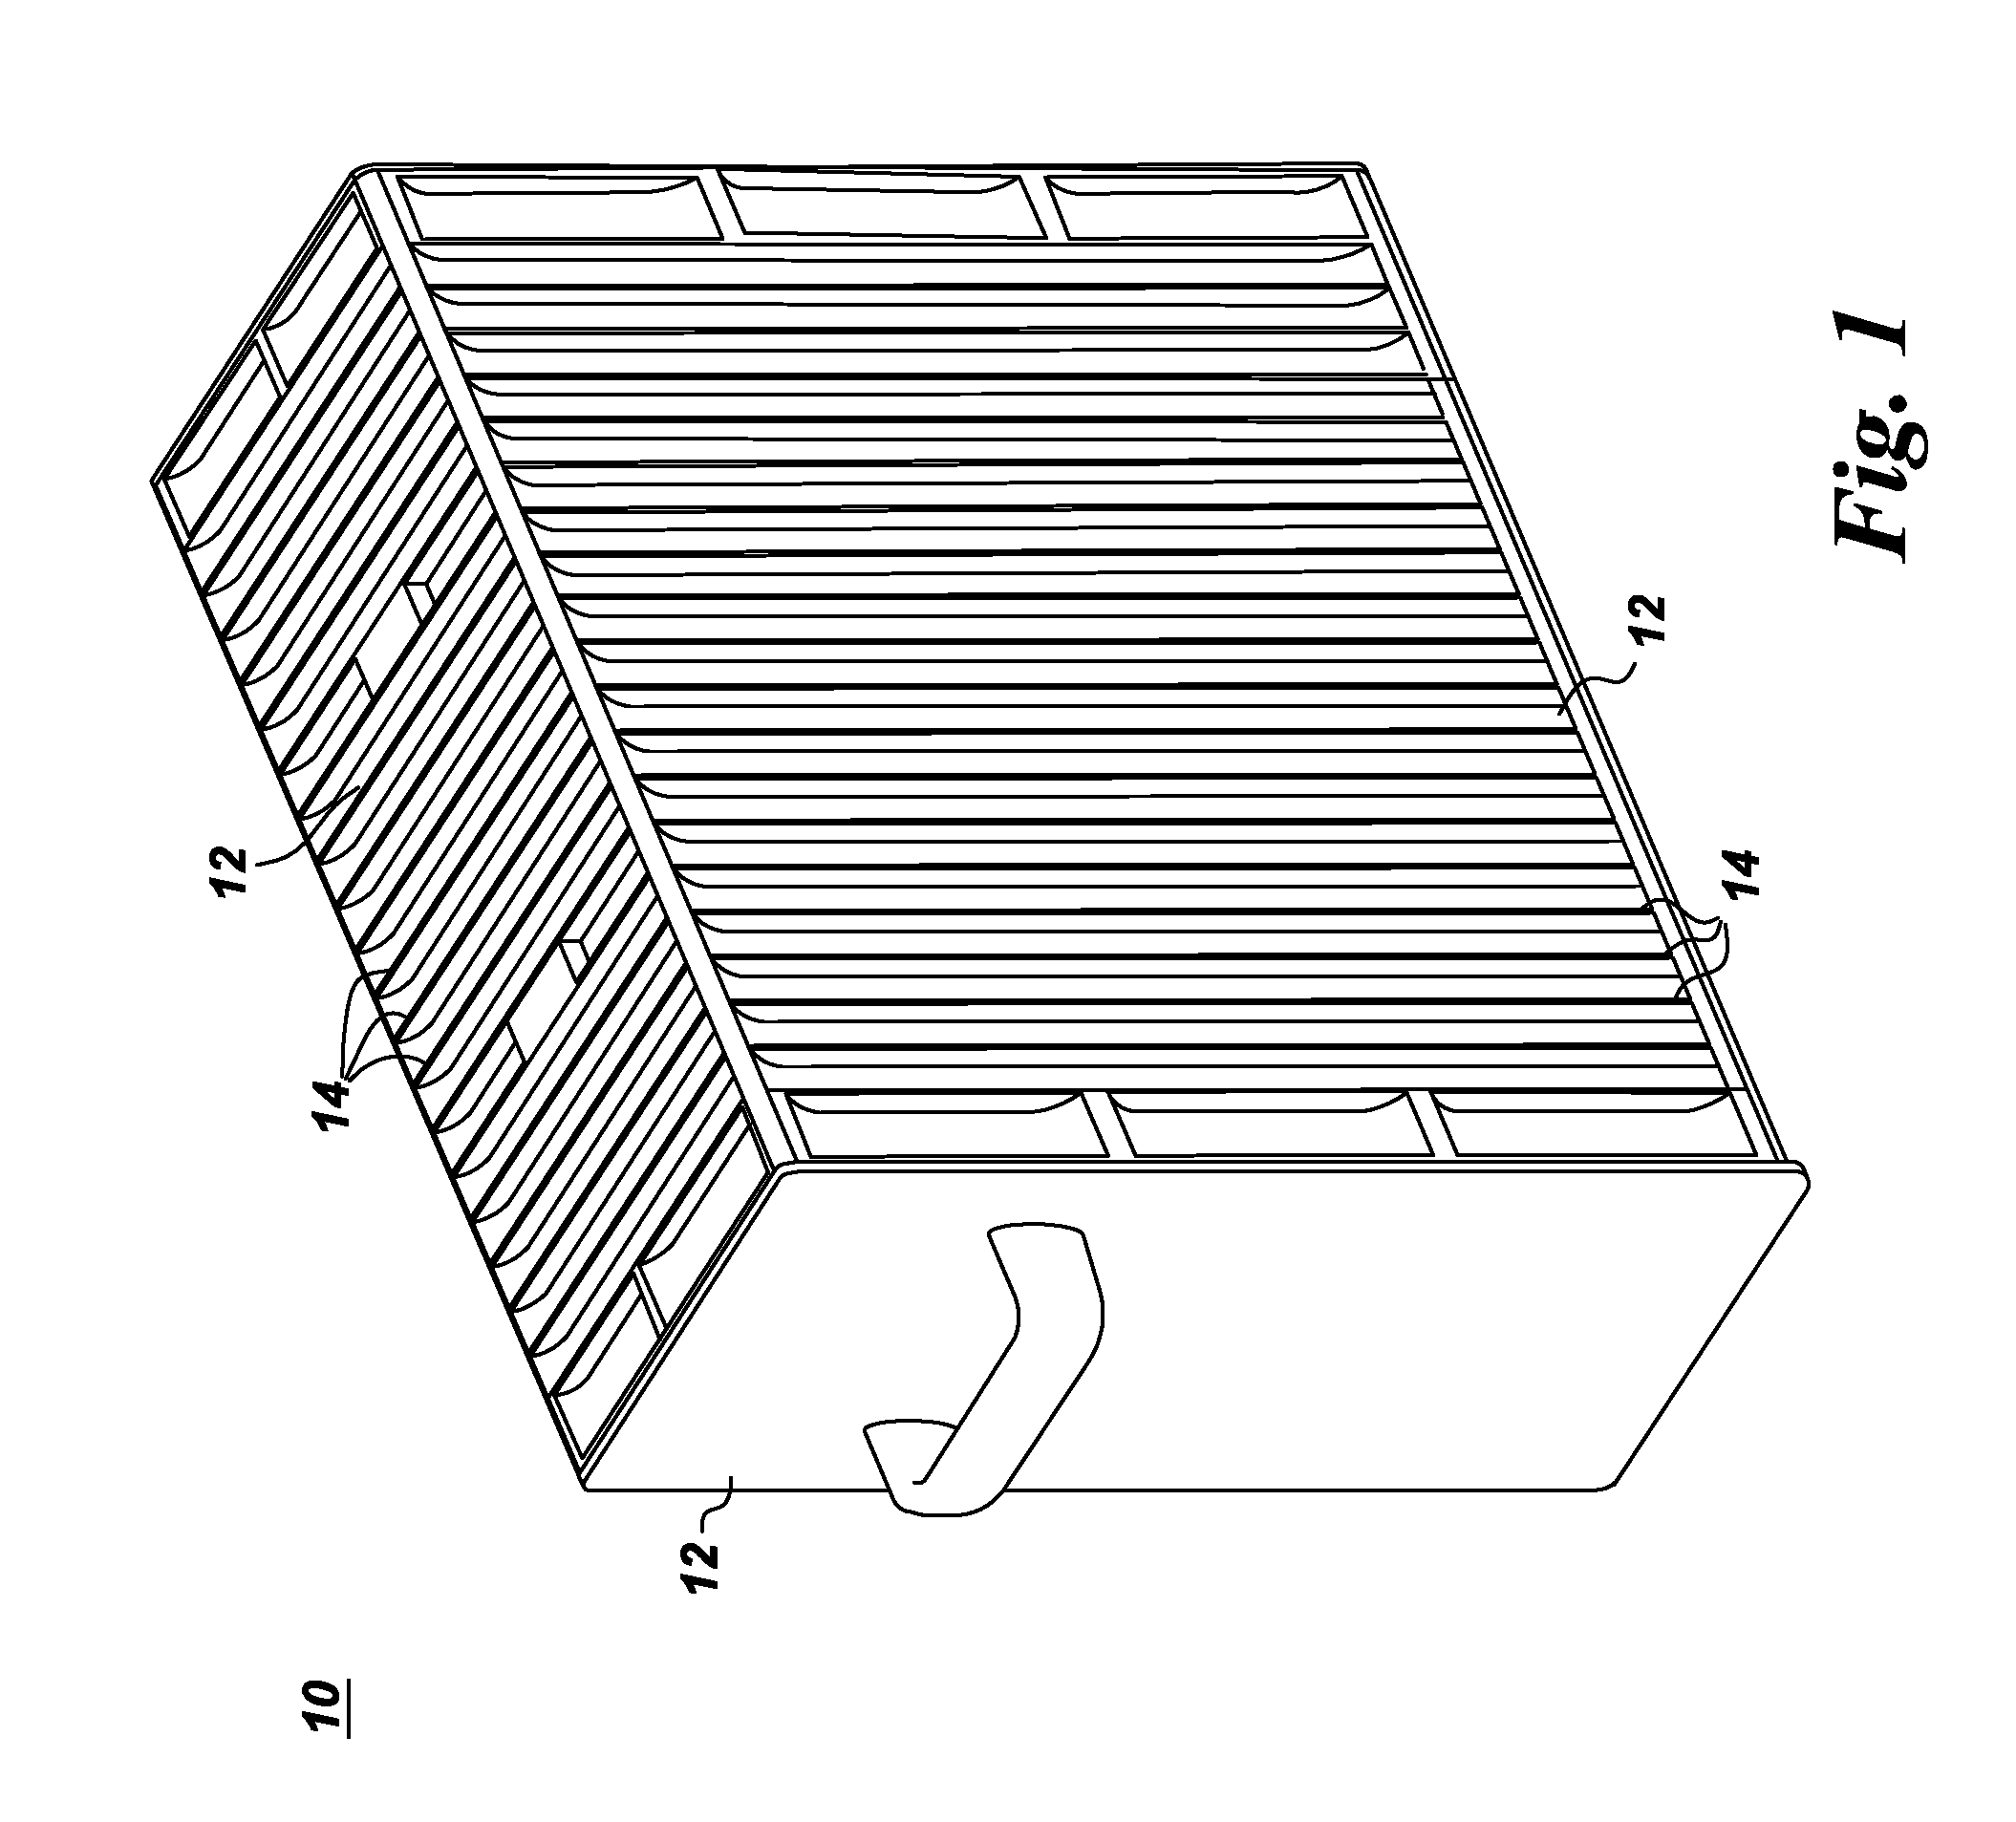 Chassis with distributed jet cooling